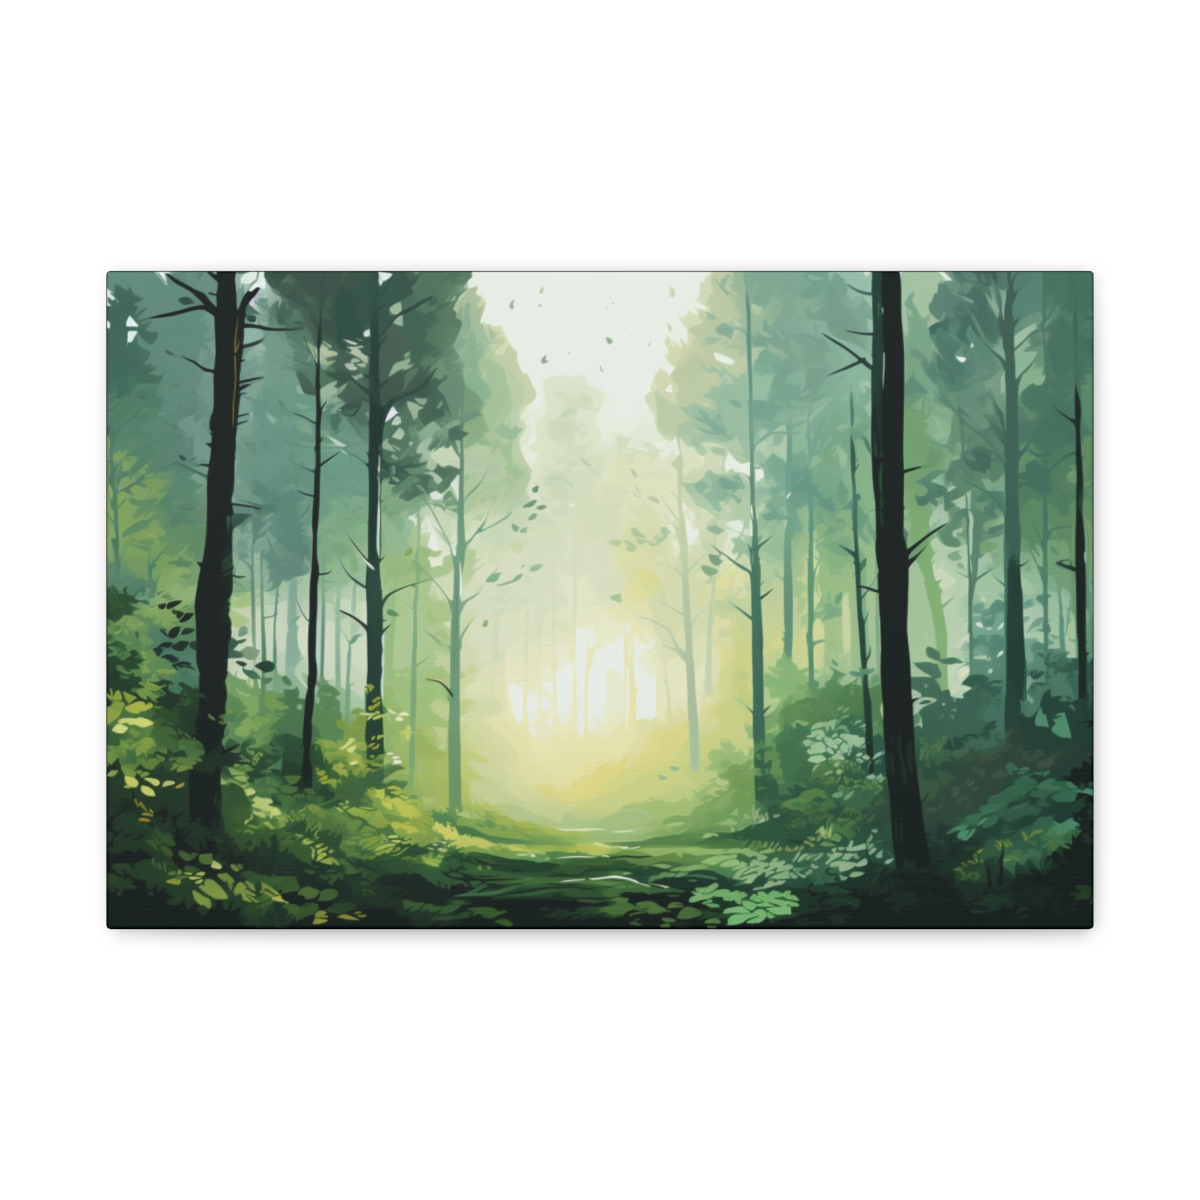 Forest Art Canvas Print: Galactic Tree Of Wisdom